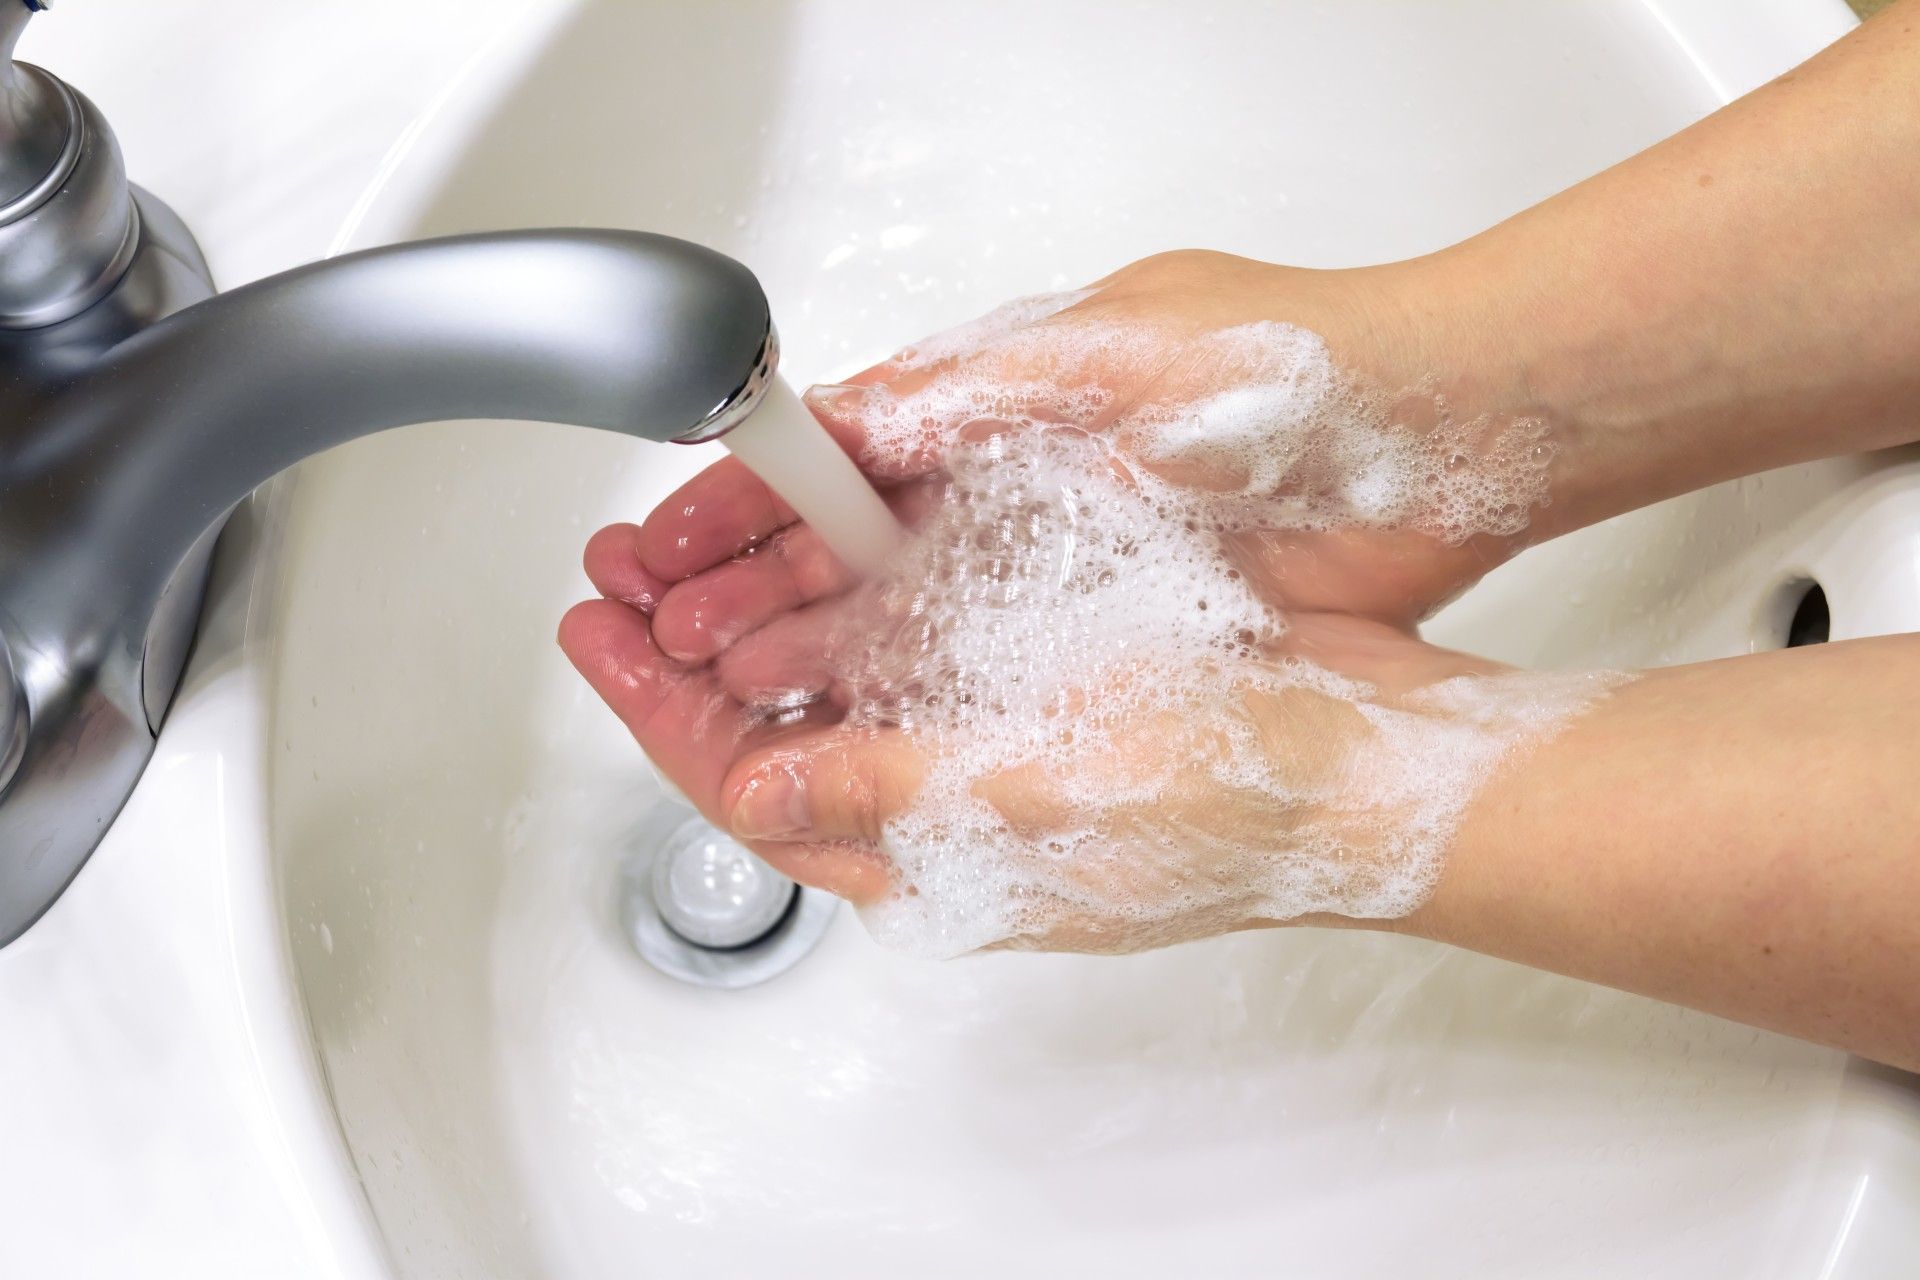 A person washes their hands in a bathroom sink - scent theory